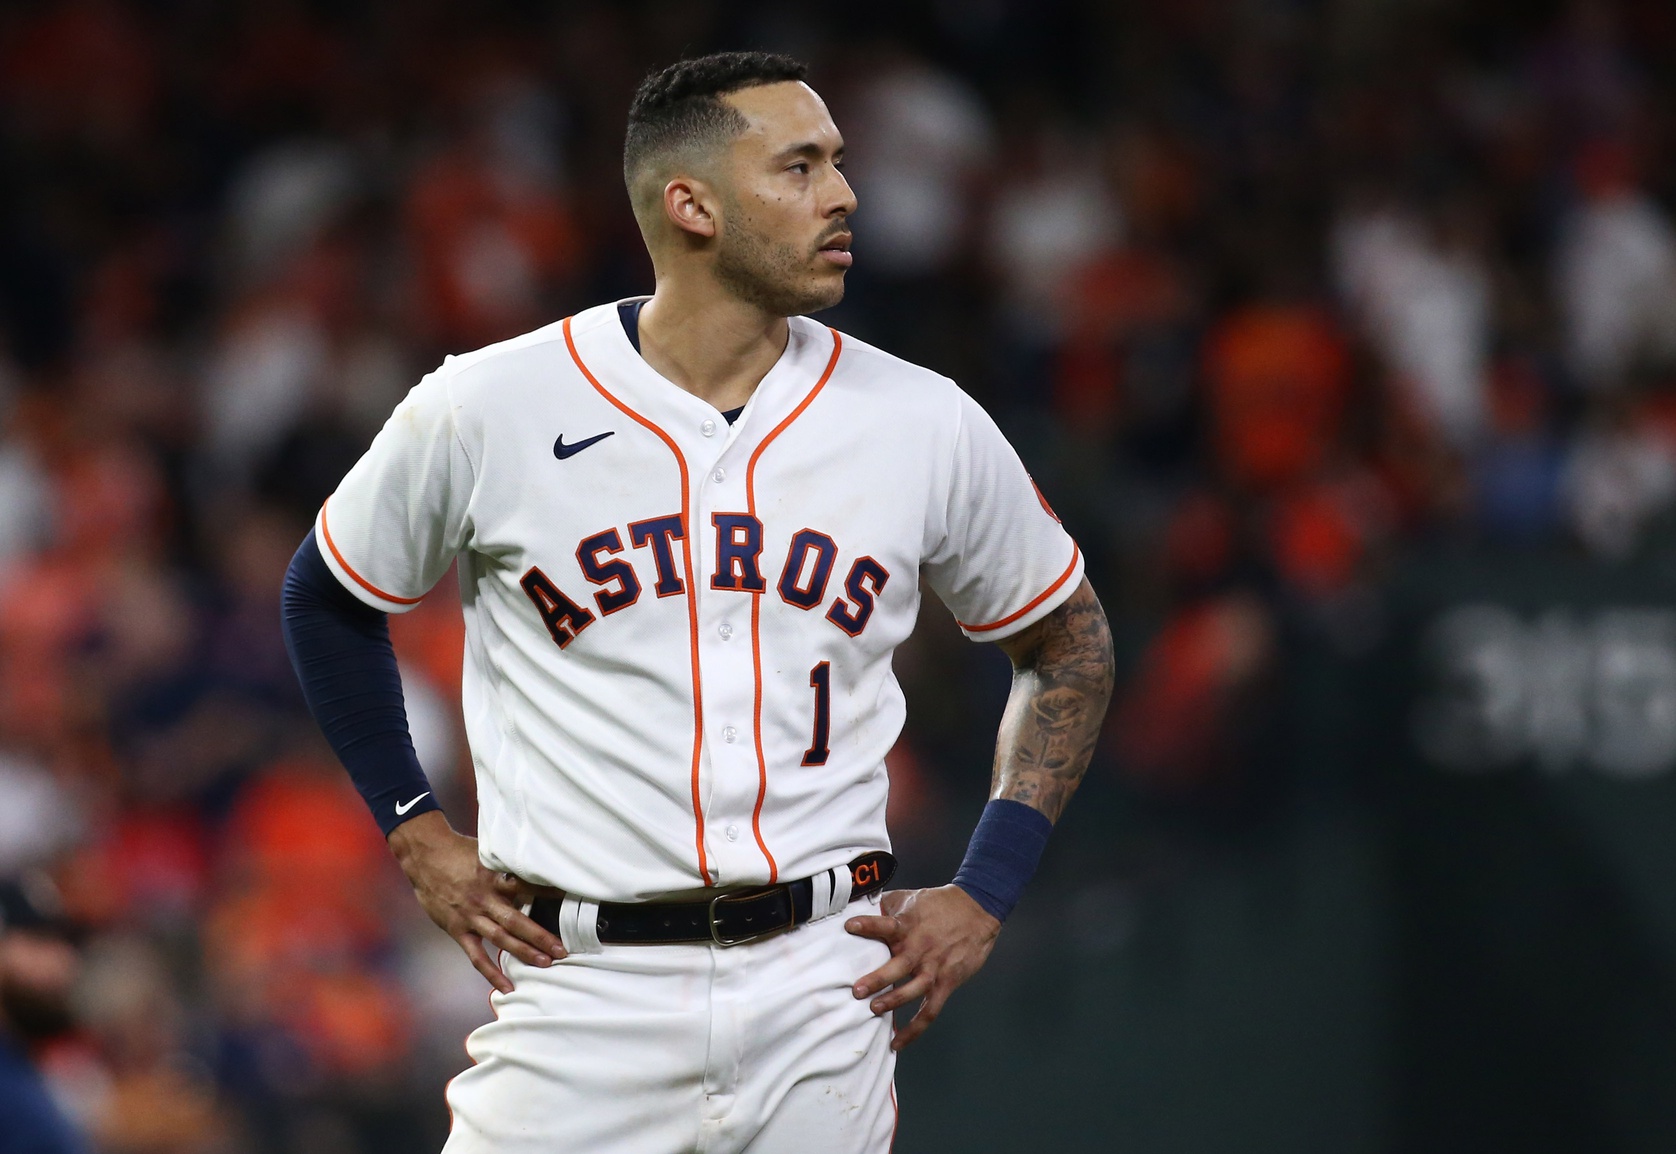 Carlos Correa Is Going Out on a High Note